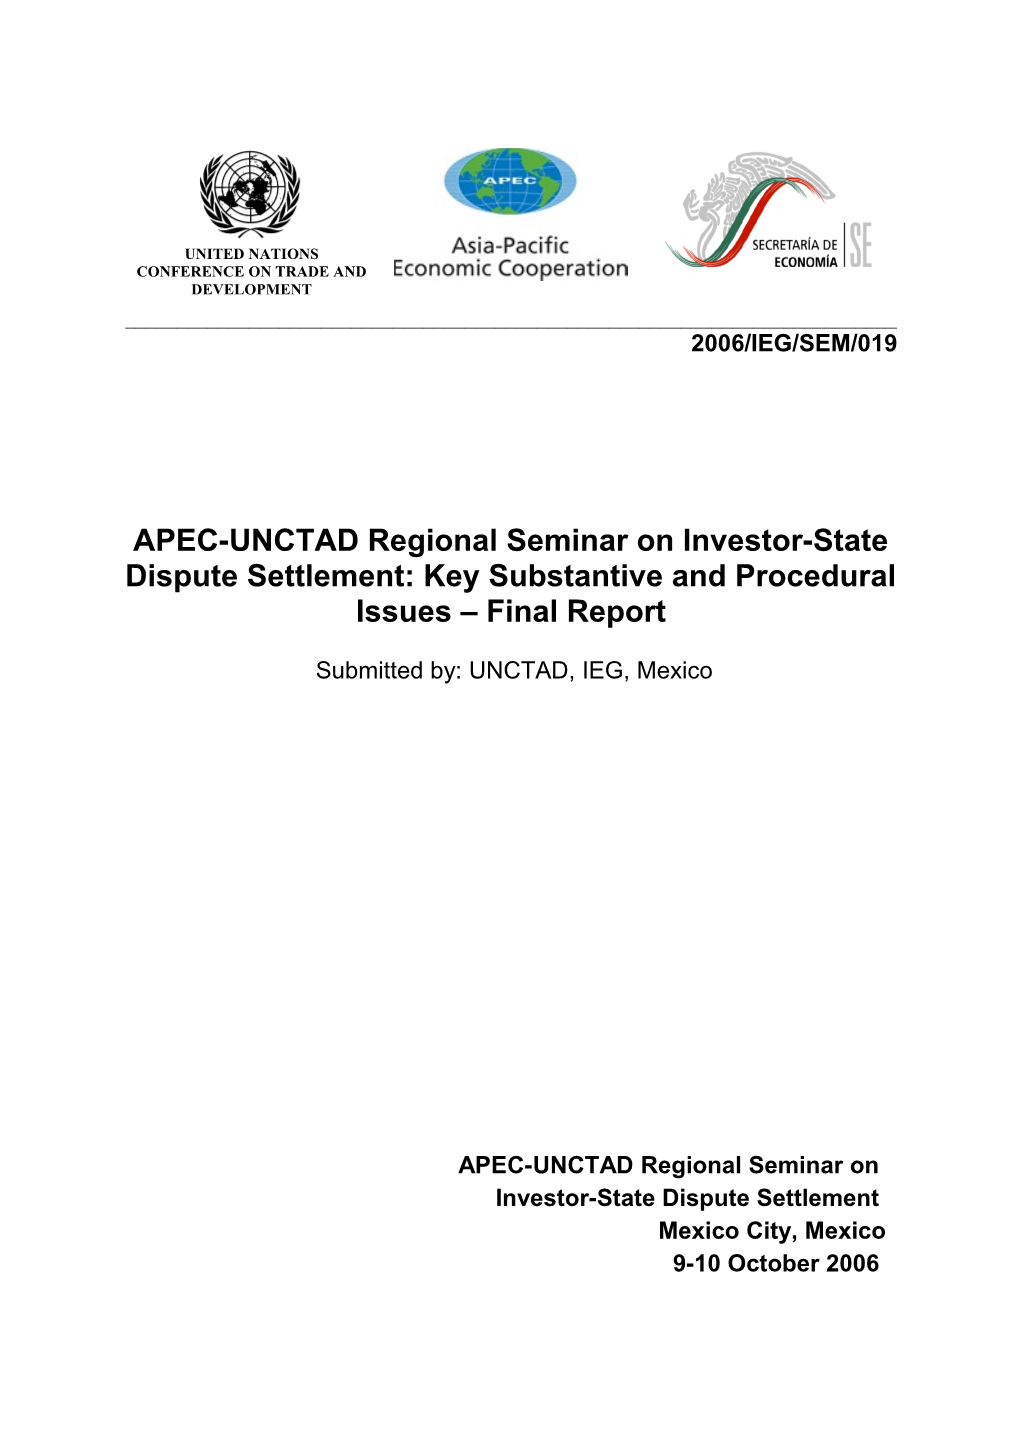 APEC-UNCTAD Regional Seminar on Investor-State Dispute Settlement: Key Substantive And